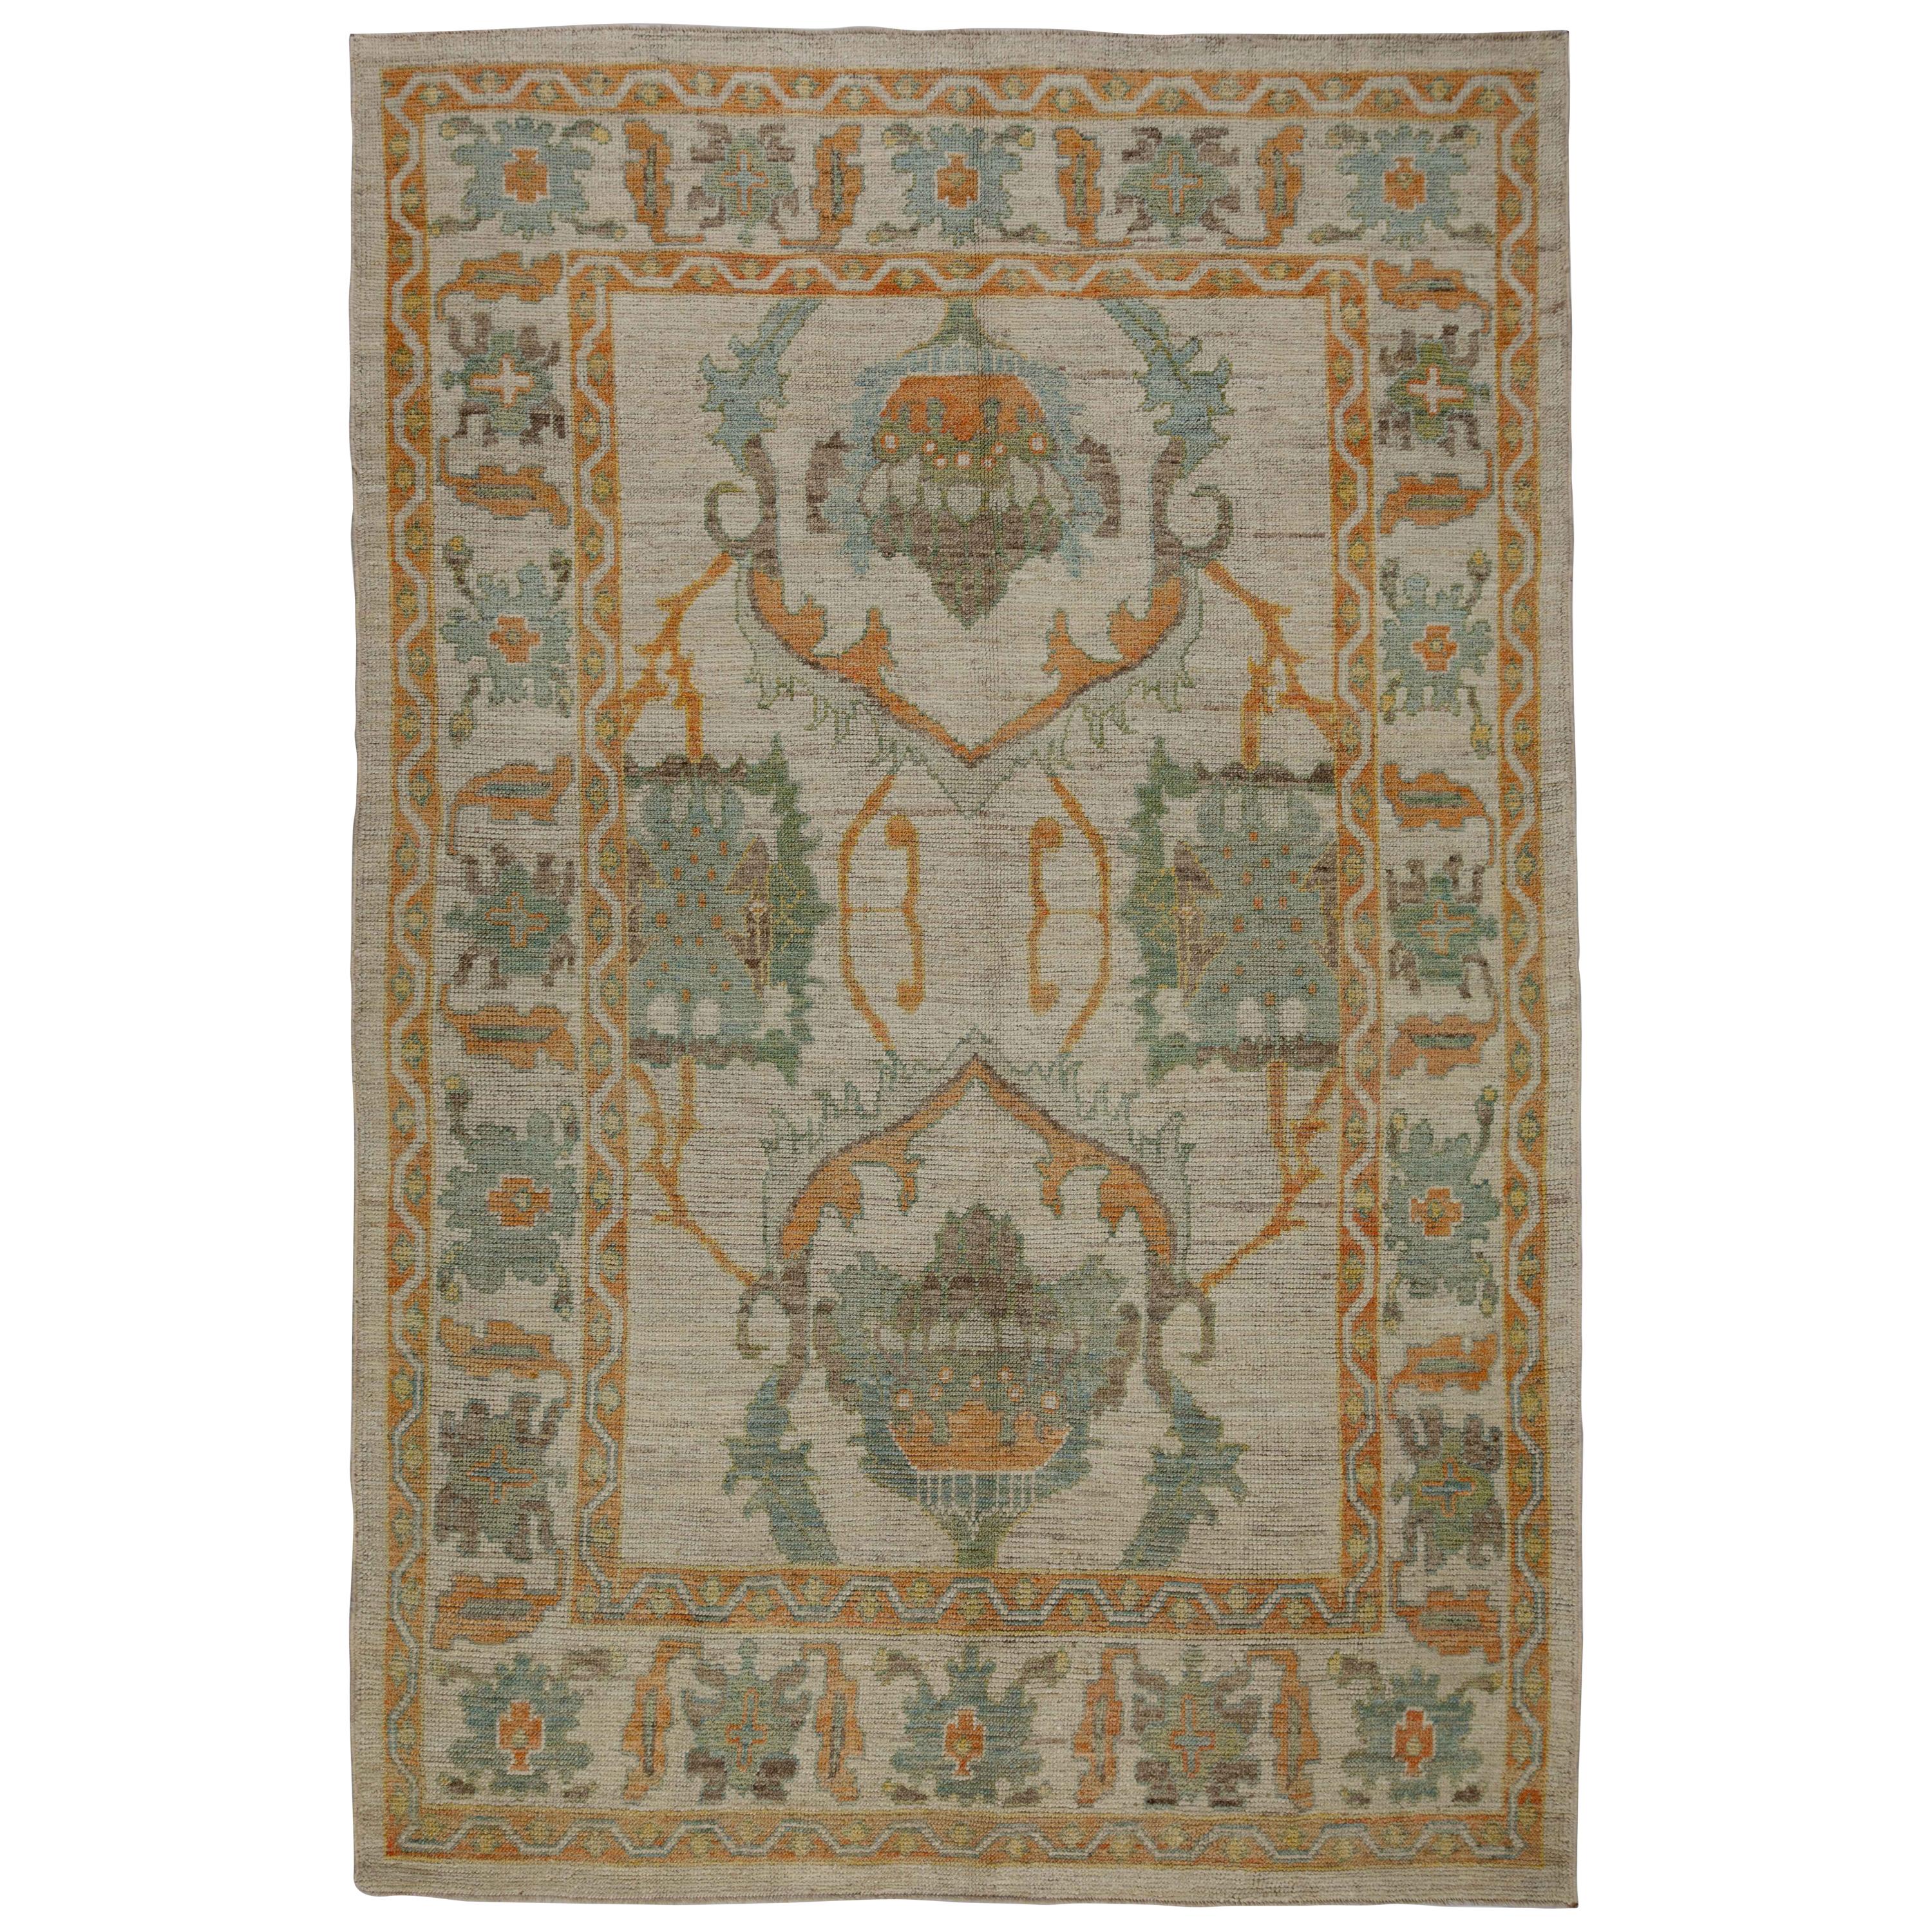 Contemporary Turkish Oushak Rug with Orange and Green Floral Patterns